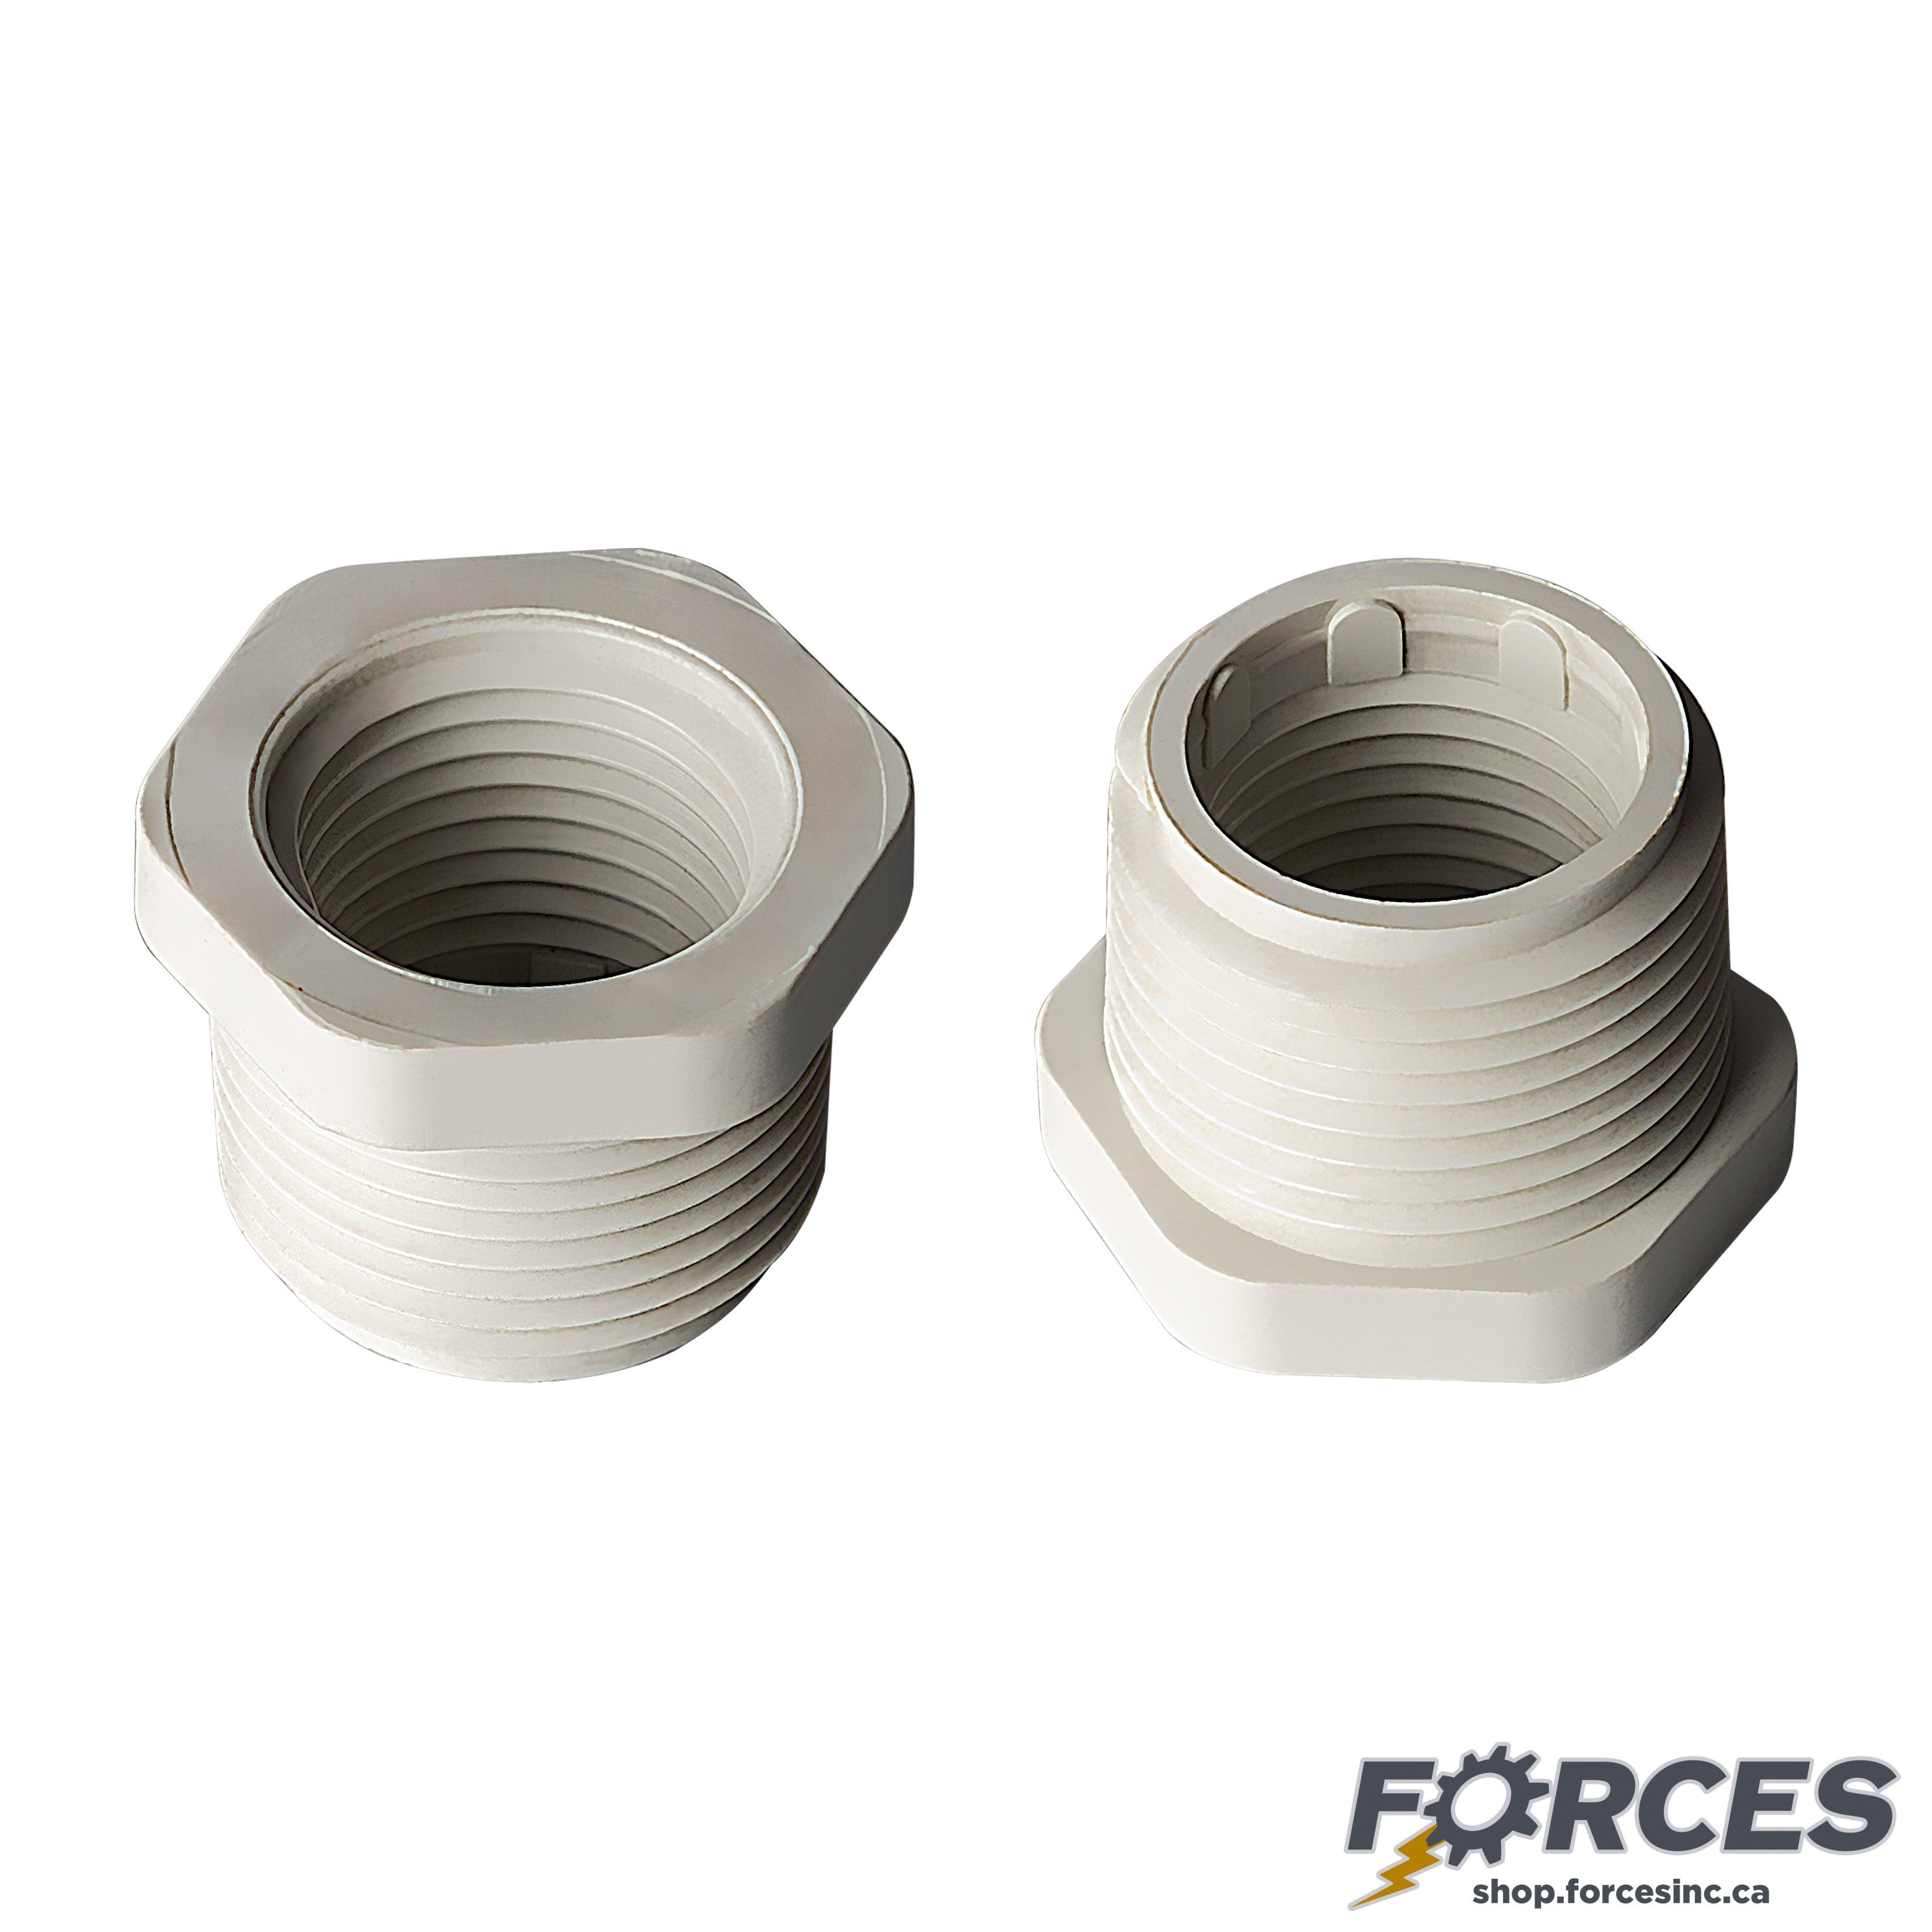 1-1/2" x 1" Reducer Bushing (MPT x FPT) Sch 40 - PVC white | 439211W - Forces Inc